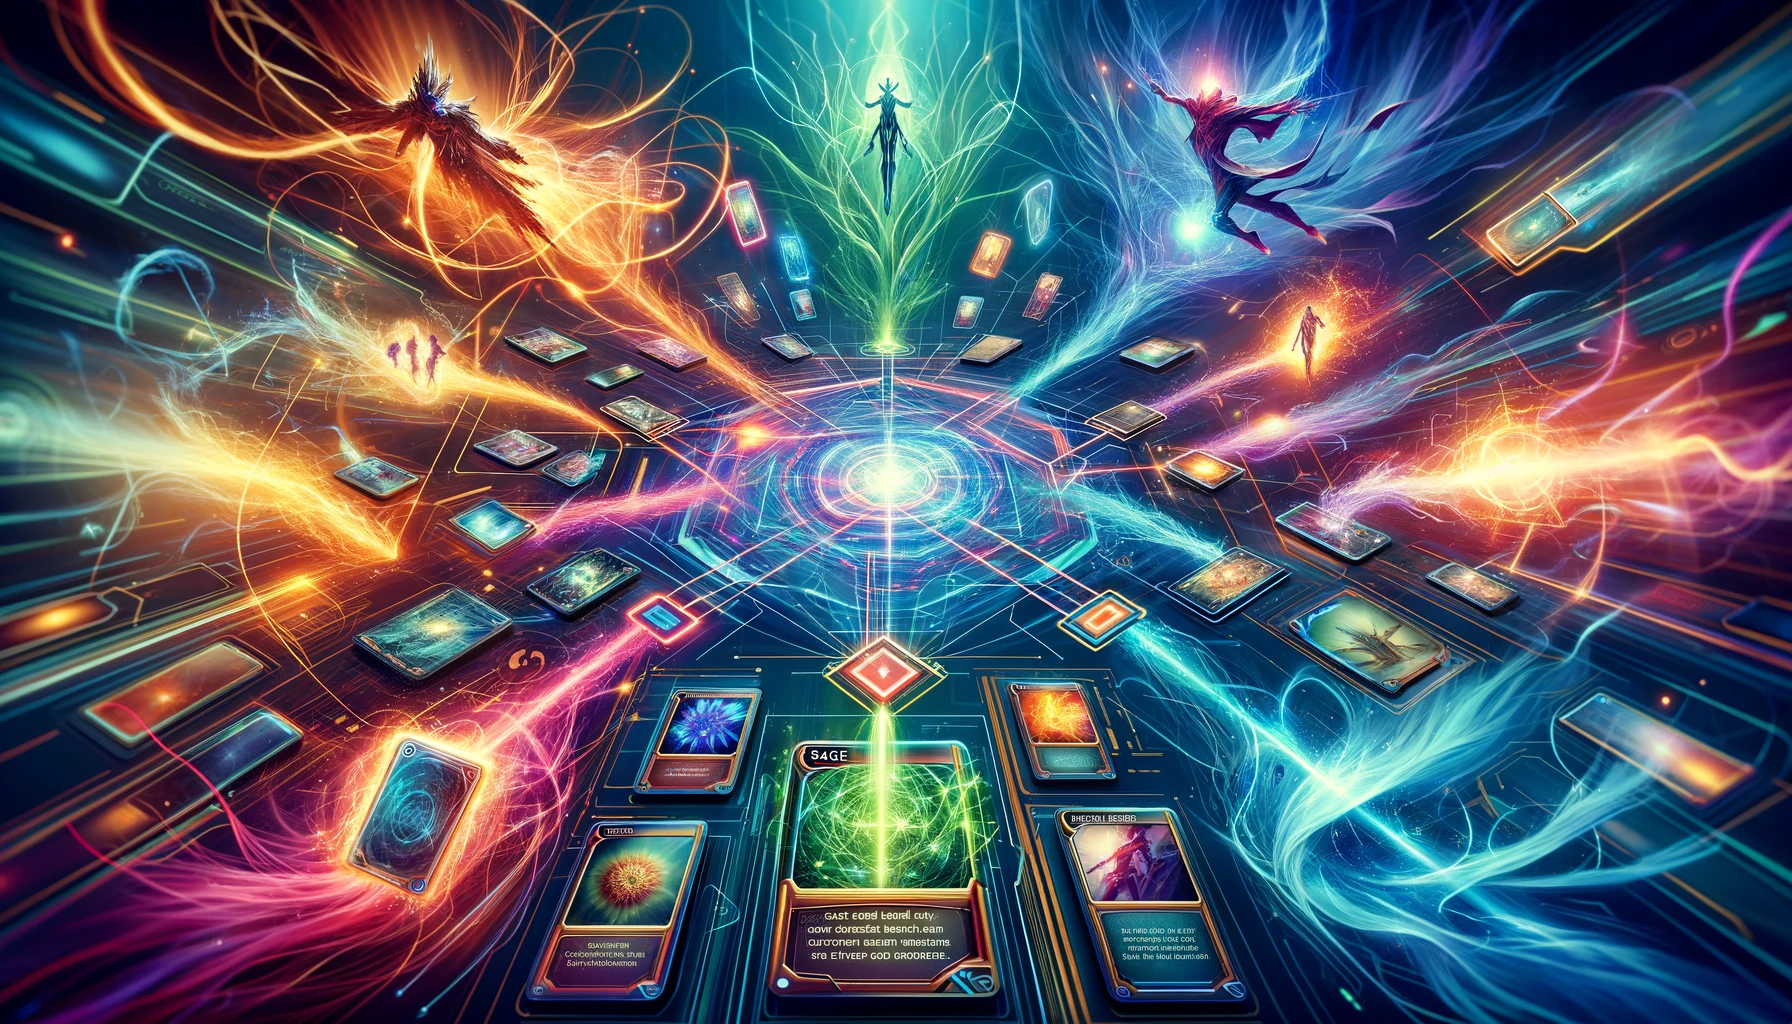 A dynamic scene from Marvel Snap showcasing Sage's card synergy, visualized as a radiant energy hub on a digital battlefield. Different cards are interconnected through vibrant streams of light and energy, enhancing each other's powers in a visually stunning display.